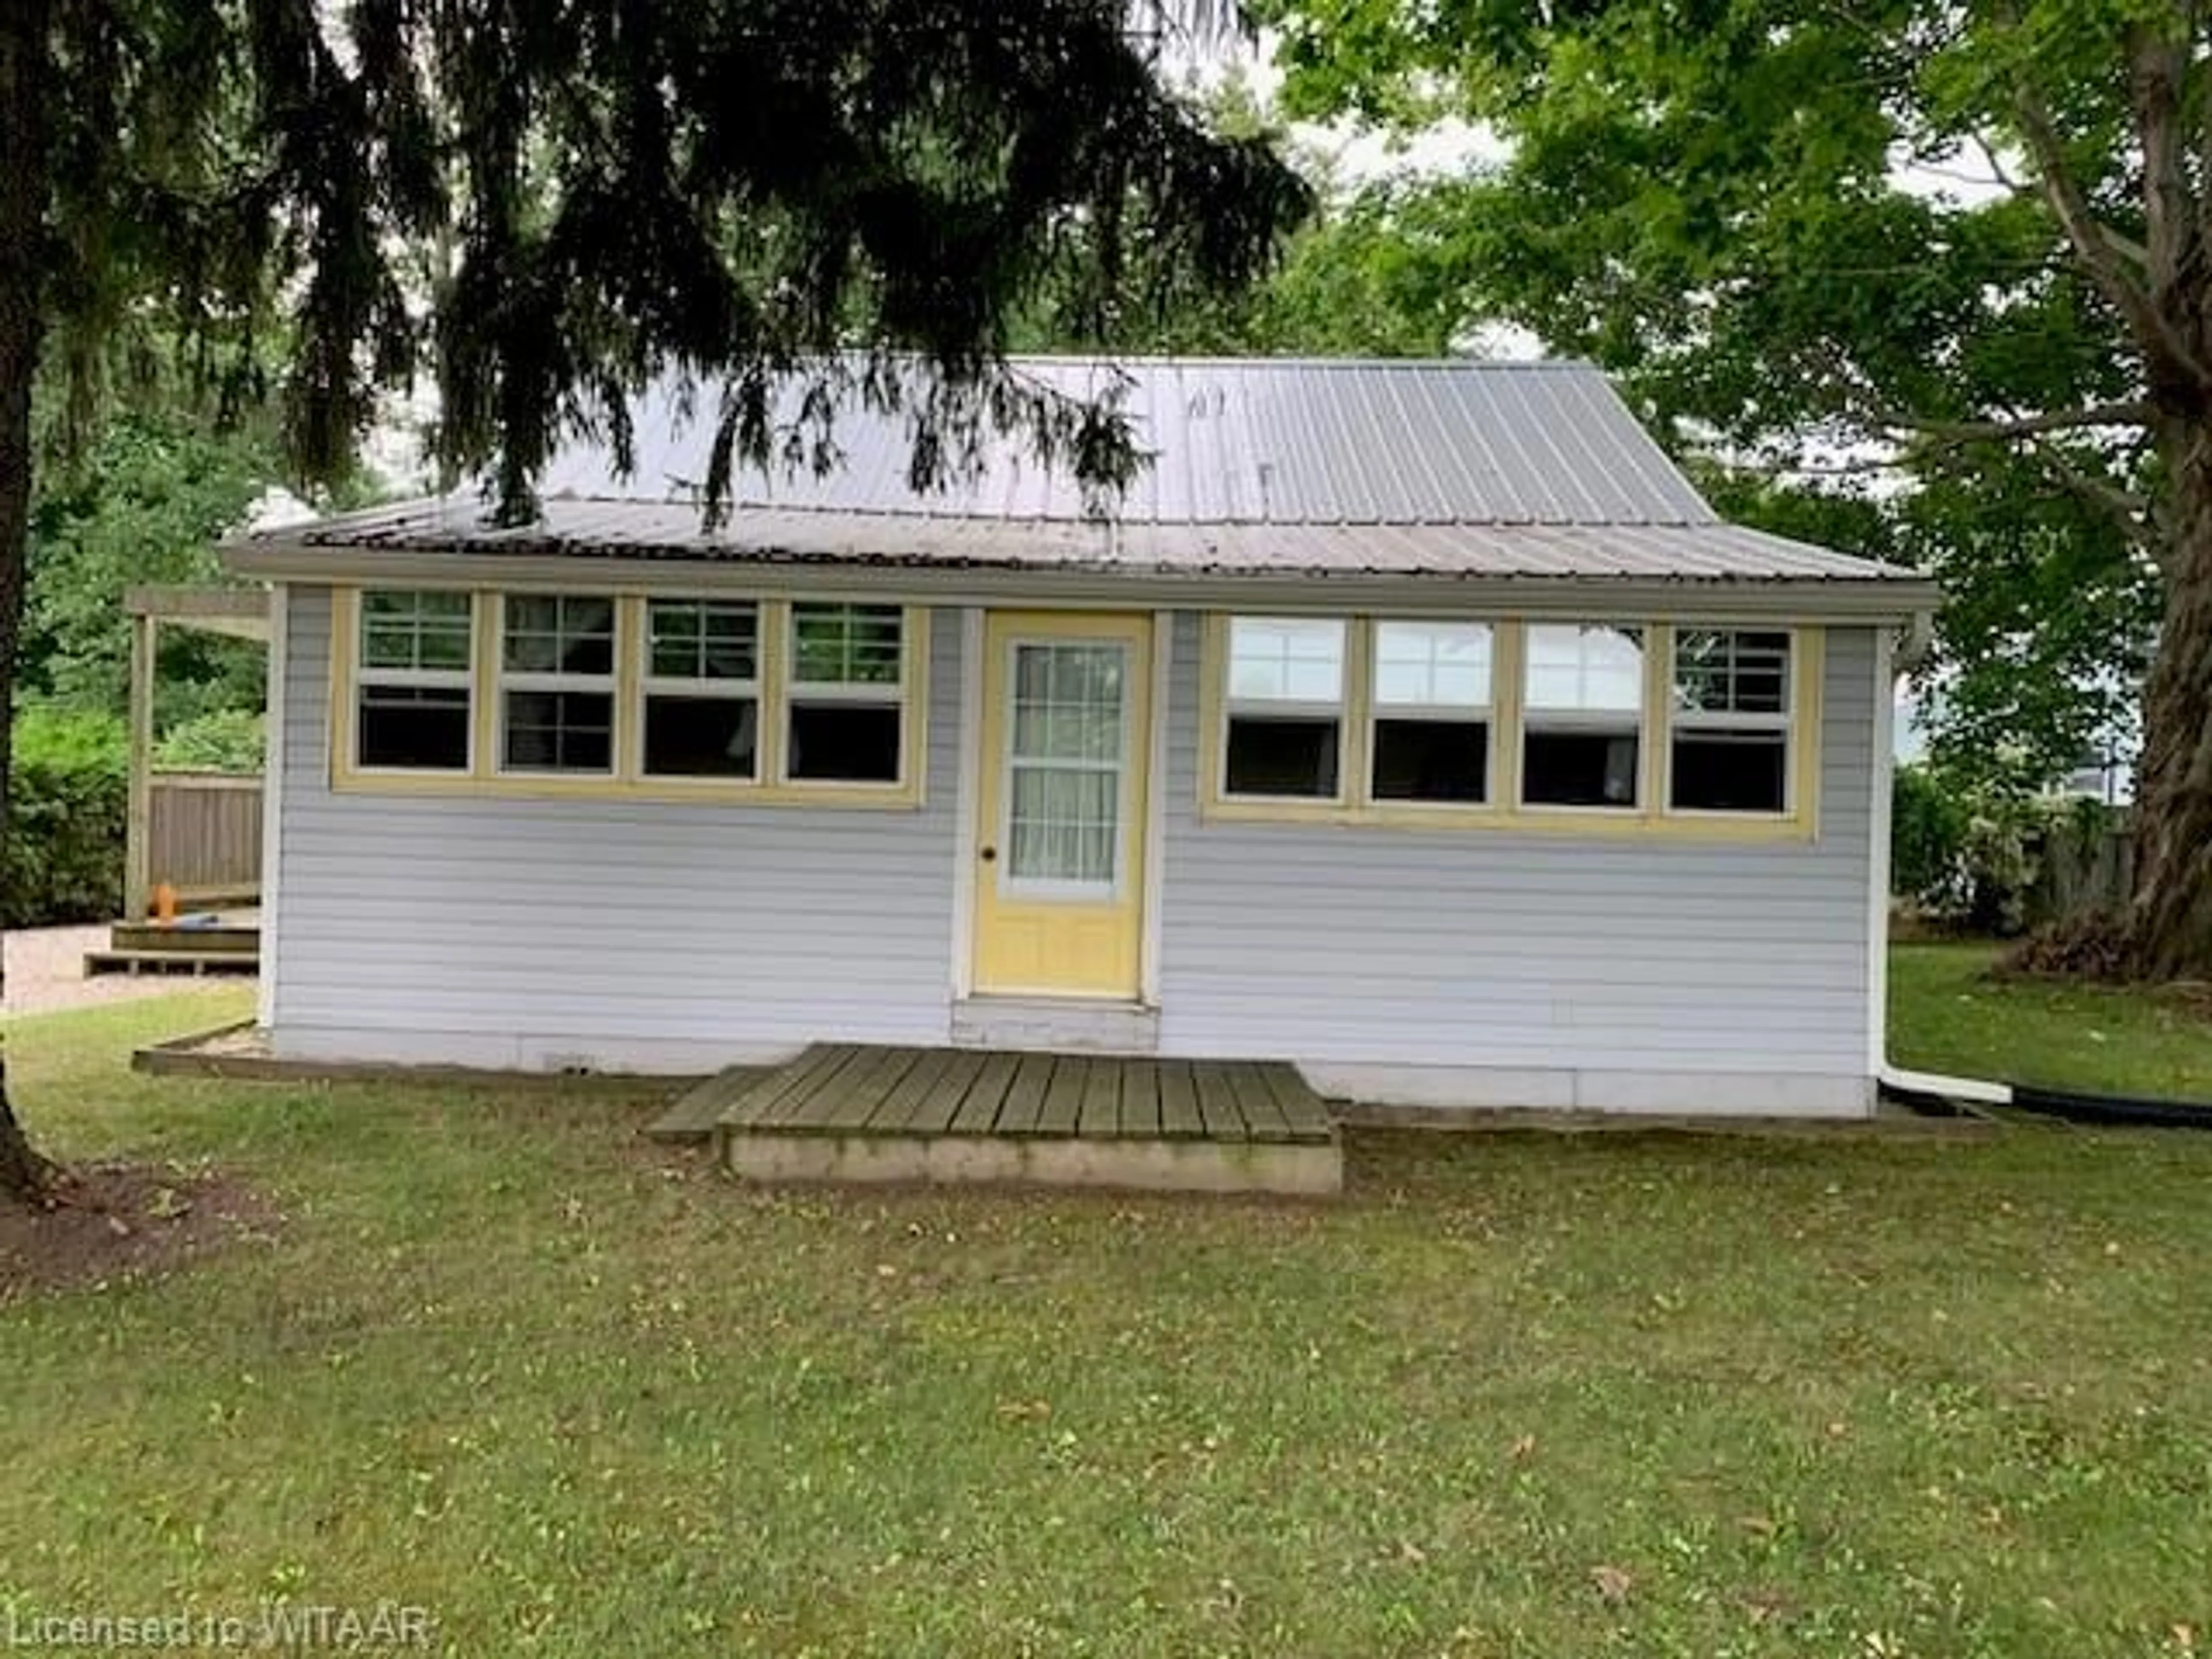 Shed for 4662 Plank Rd, Port Burwell Ontario N0J 1T0